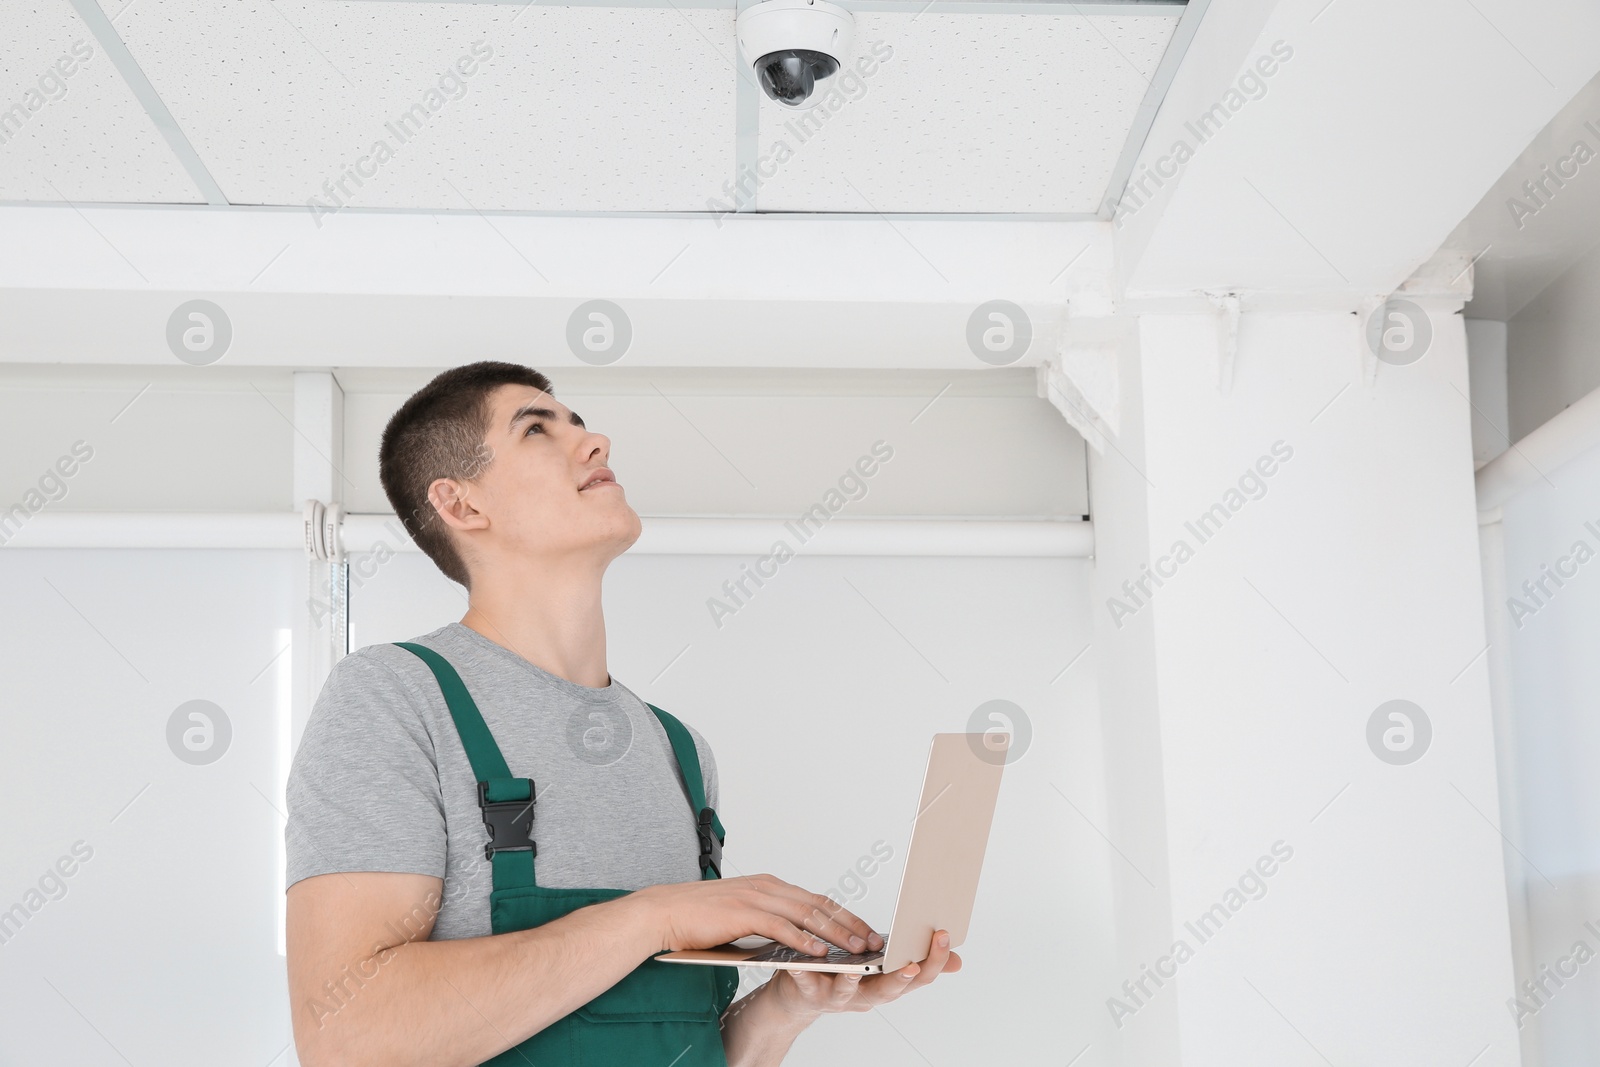 Photo of Technician with laptop installing CCTV camera on ceiling indoors